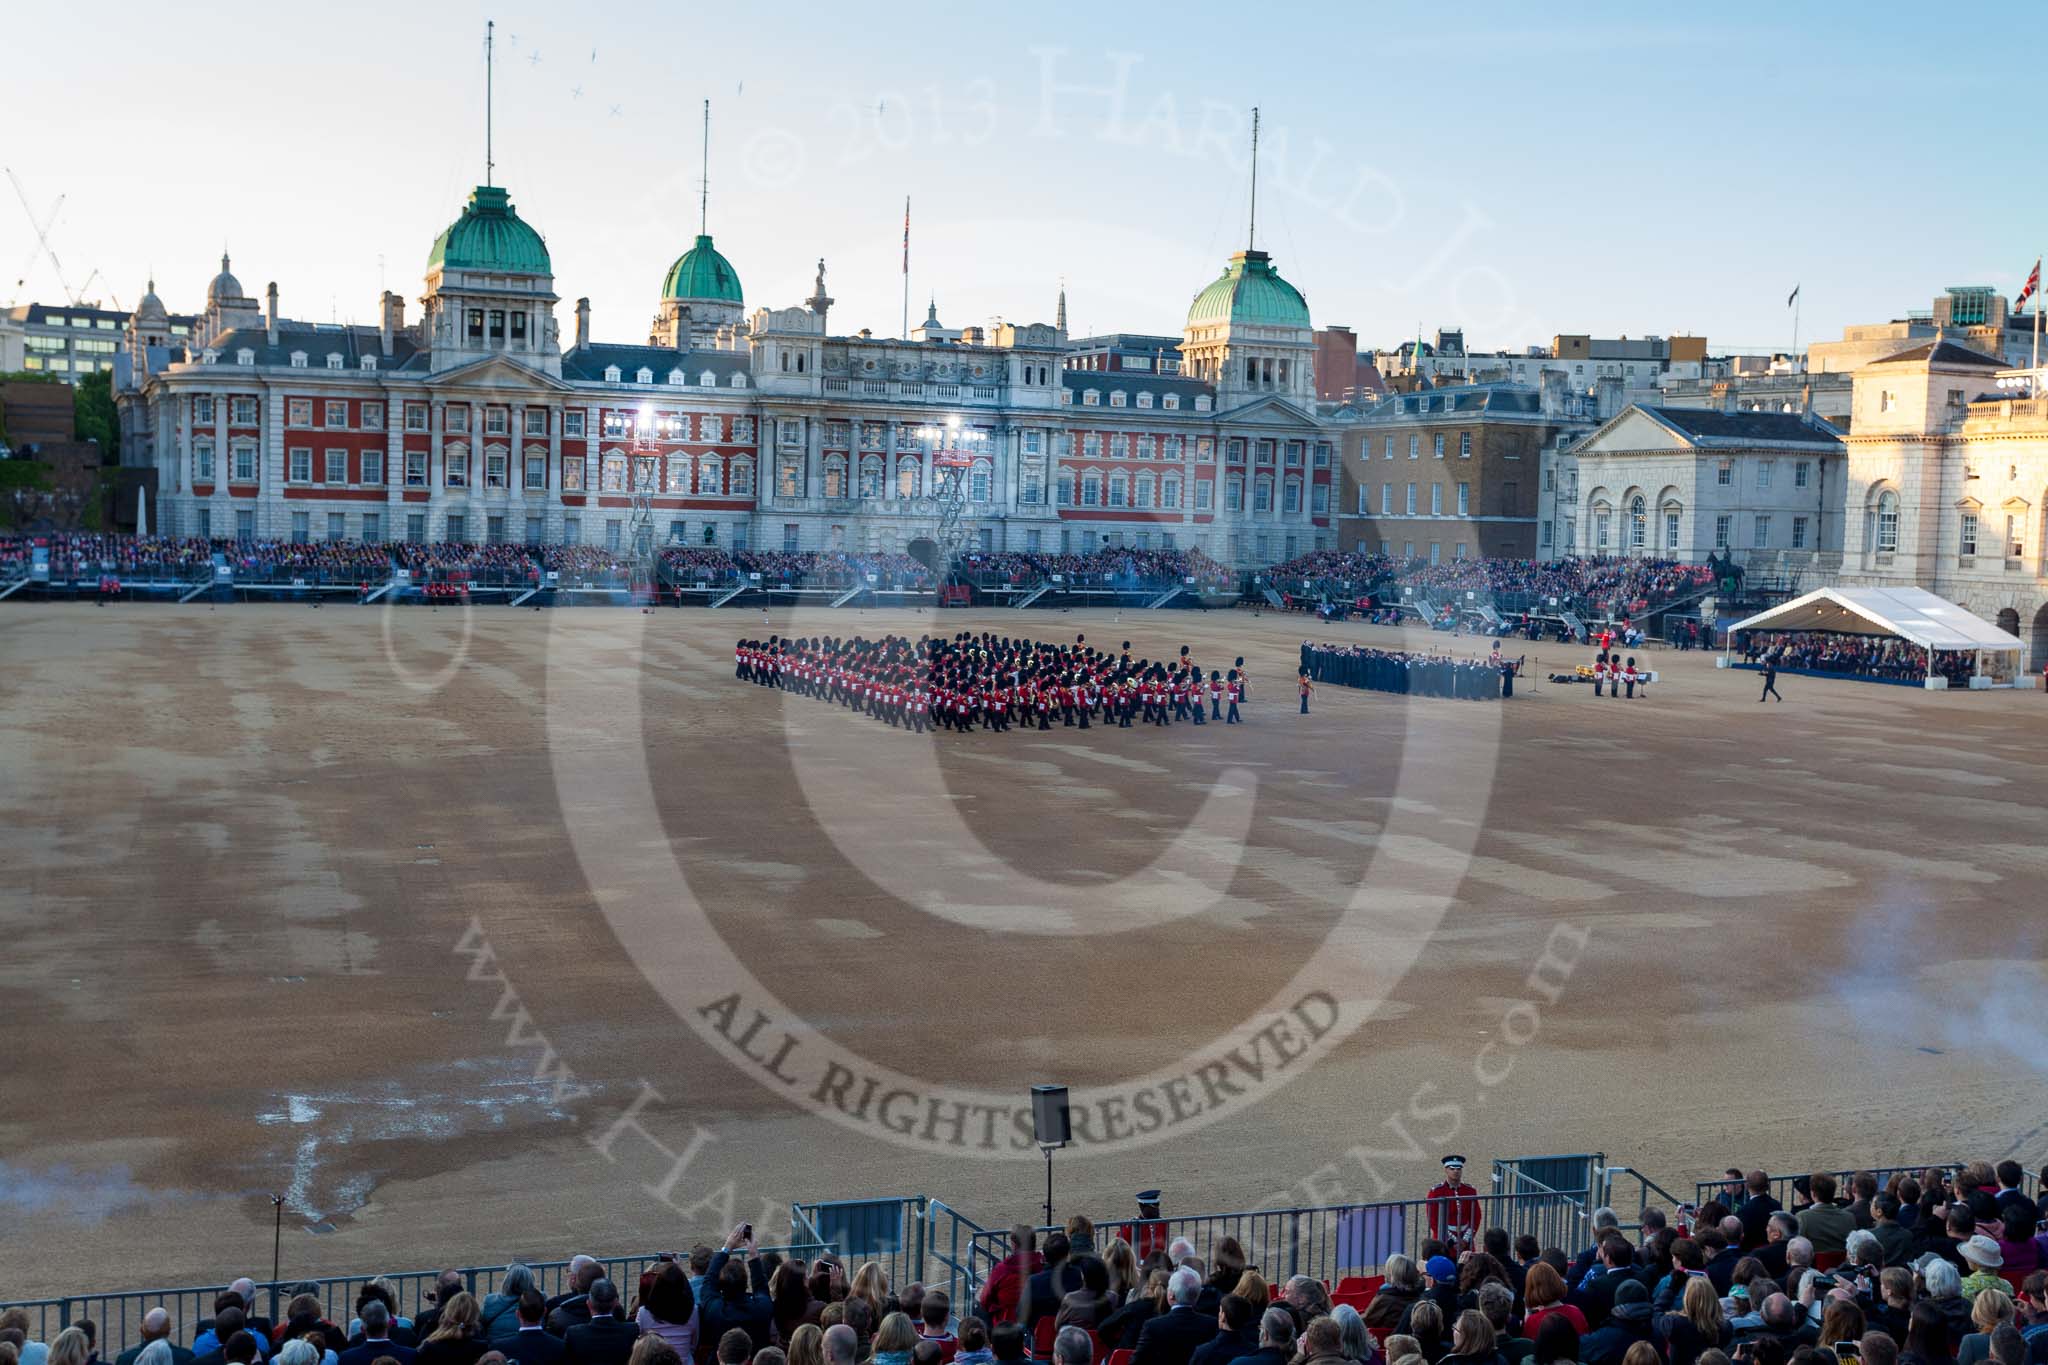 Beating Retreat 2015 - Waterloo 200.
Horse Guards Parade, Westminster,
London,

United Kingdom,
on 10 June 2015 at 20:32, image #123